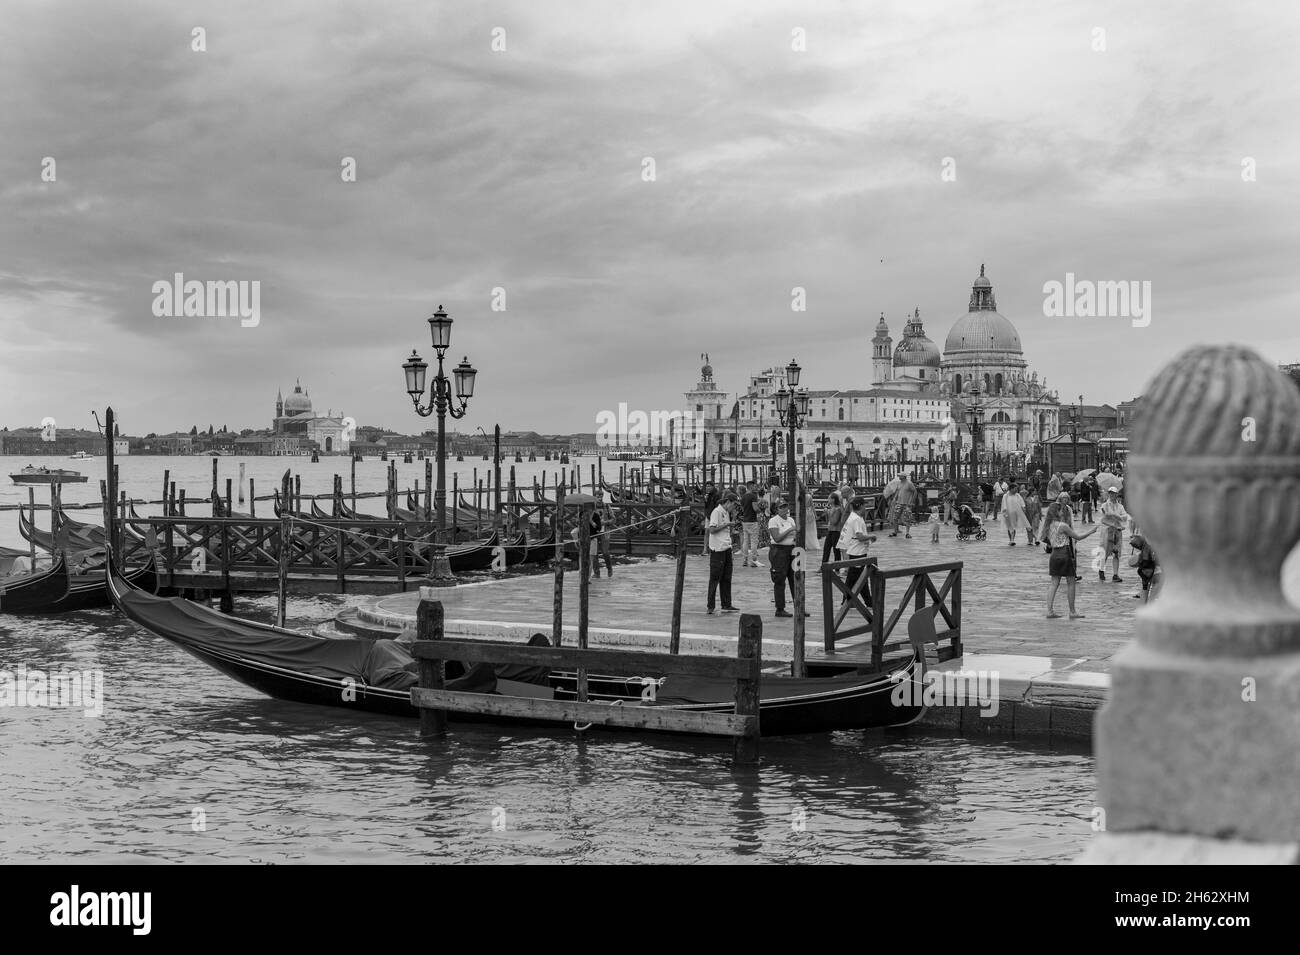 stunning view of the venice skyline with the grand canal and basilica santa maria della salute in the distance during a rainy day Stock Photo